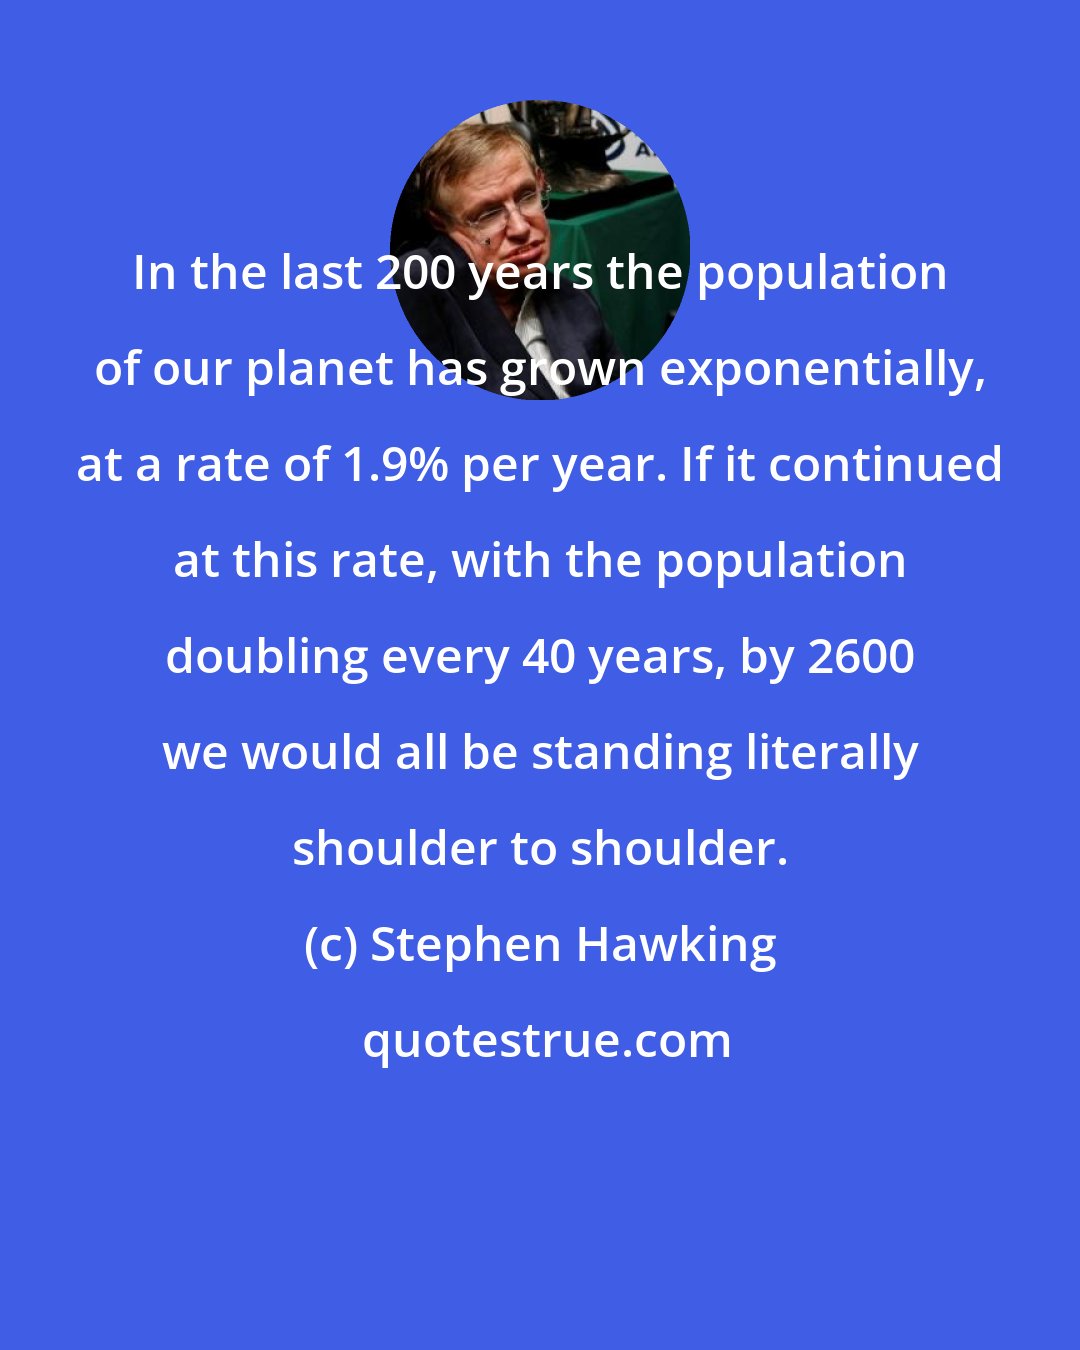 Stephen Hawking: In the last 200 years the population of our planet has grown exponentially, at a rate of 1.9% per year. If it continued at this rate, with the population doubling every 40 years, by 2600 we would all be standing literally shoulder to shoulder.